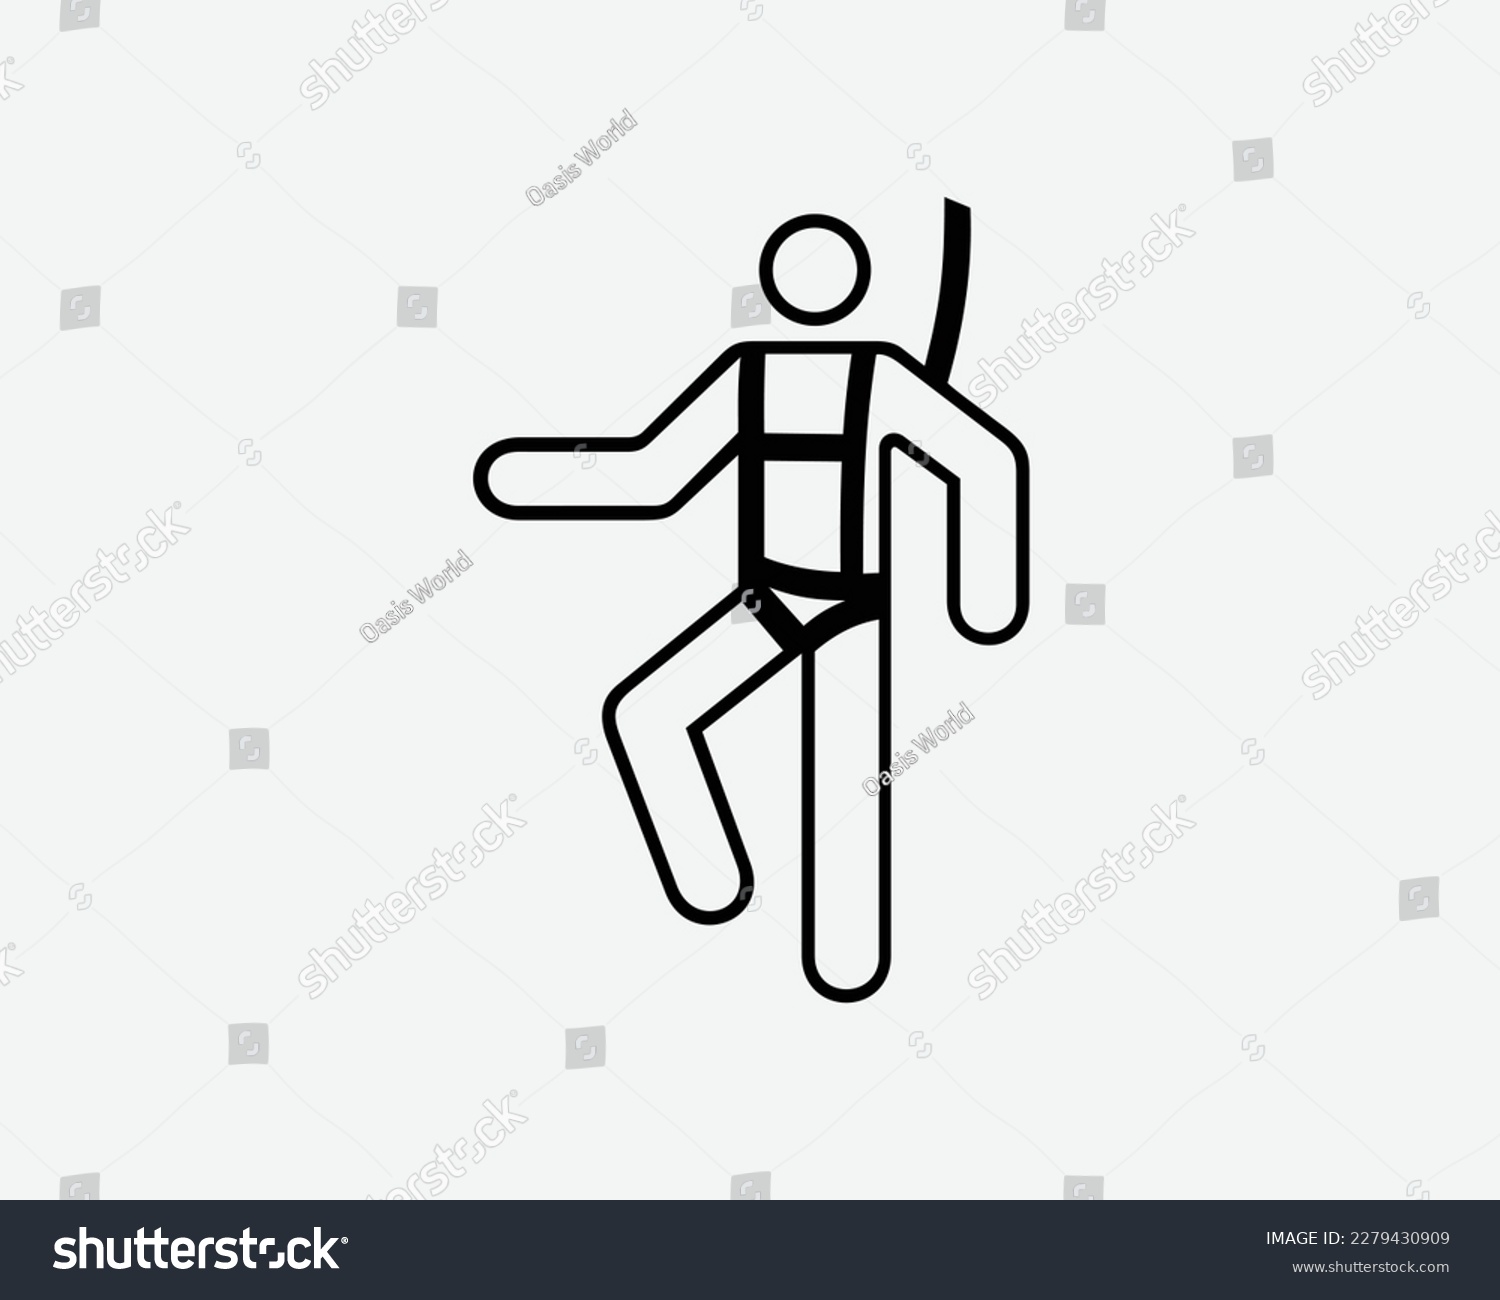 SVG of Man Wearing Safety Harness Icon Worker Climber Hanging Black White Silhouette Symbol Icon Sign Graphic Clipart Artwork Illustration Pictogram Vector svg